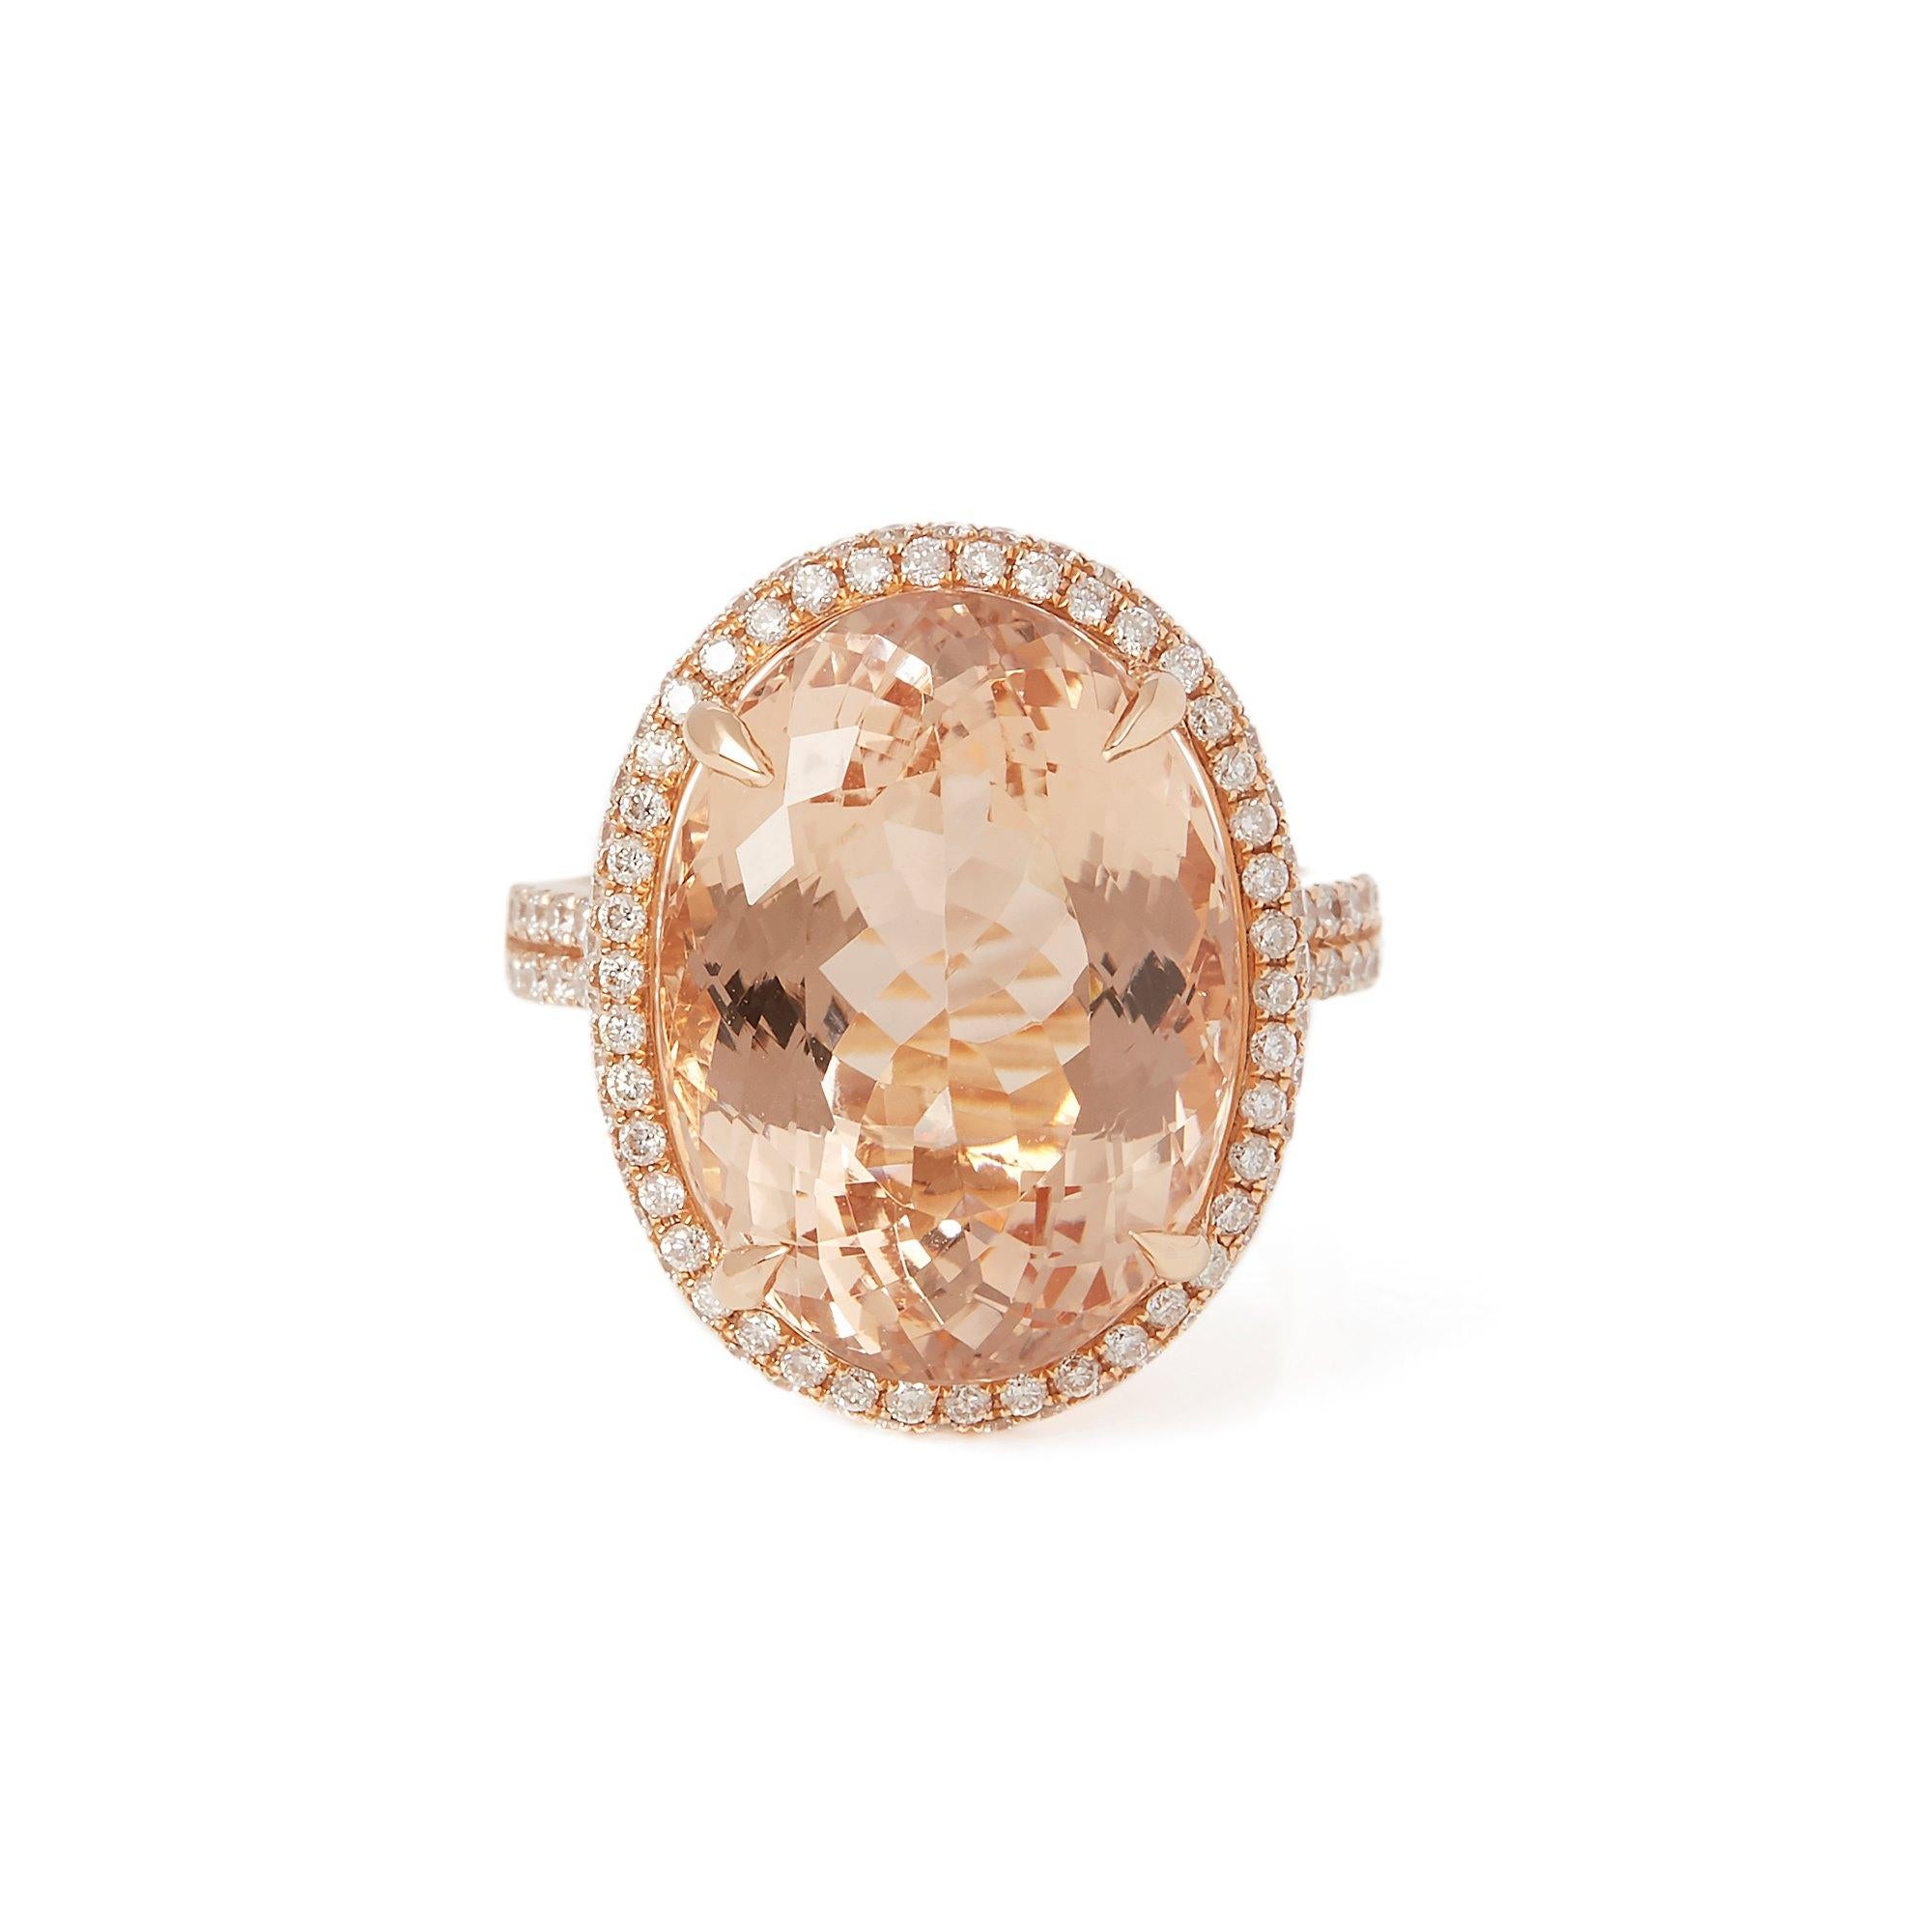 This ring designed by David Jerome is from his private collection and features one oval cut morganite totalling 14.31cts sourced in Brazil. Set with round brilliant cut Diamonds totalling 0.85cts mounted in an 18k rose gold setting. Finger size UK